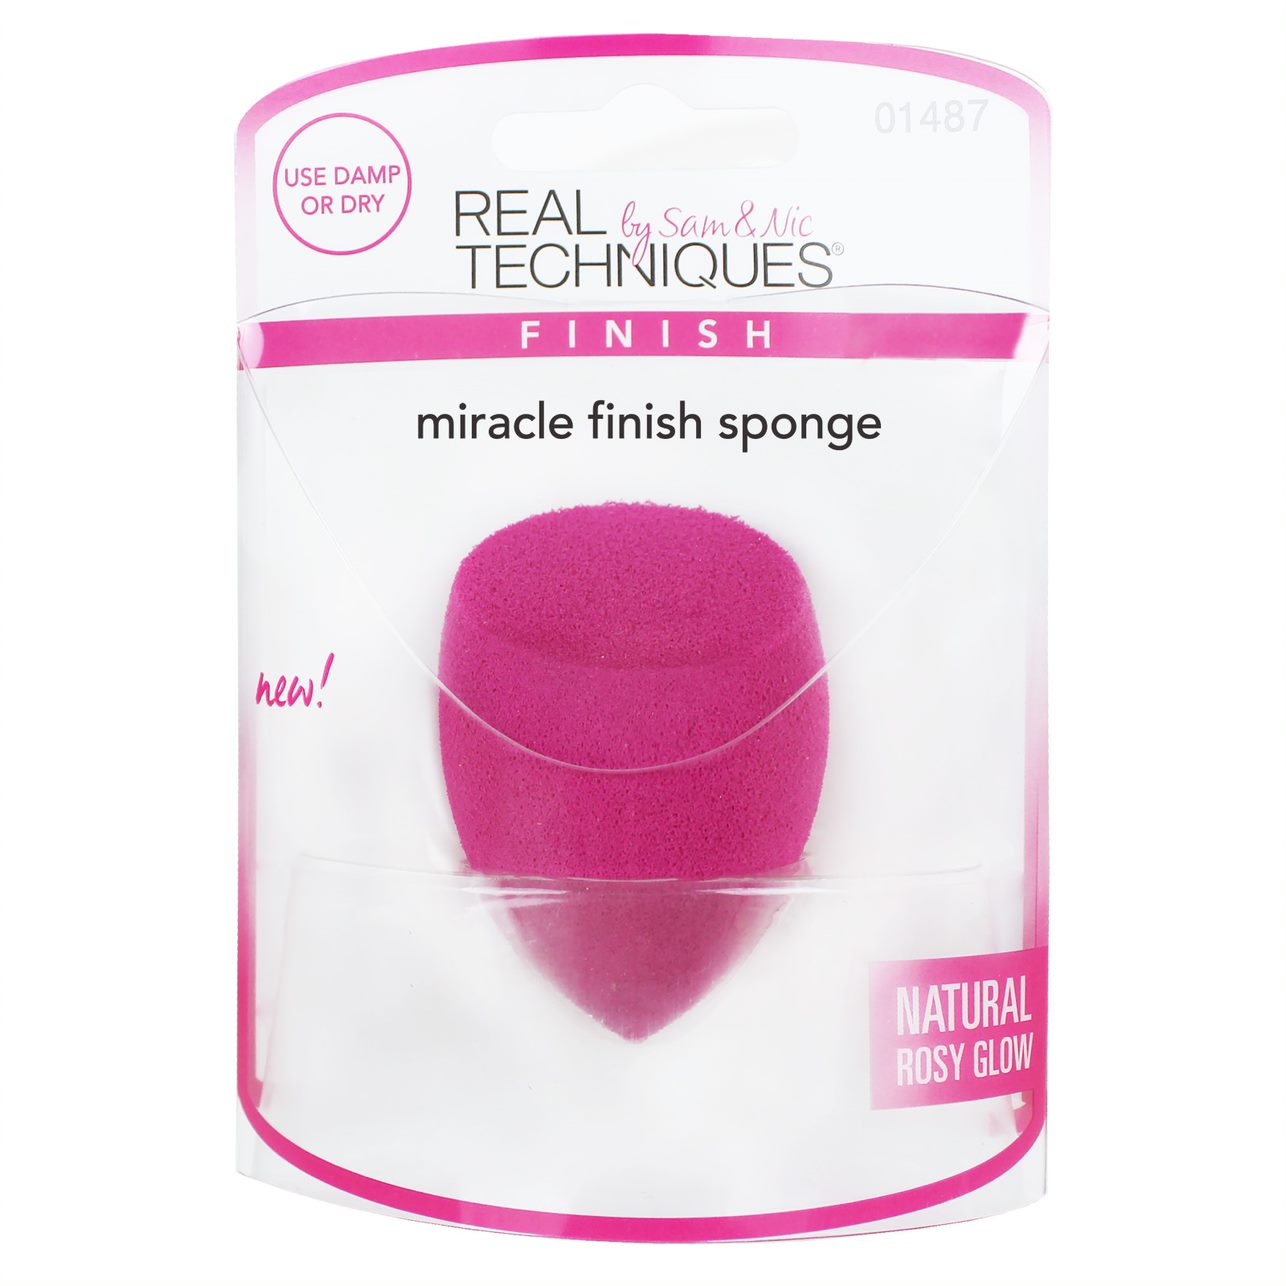 Real Techniques #1487 Miracle Finish Sponge